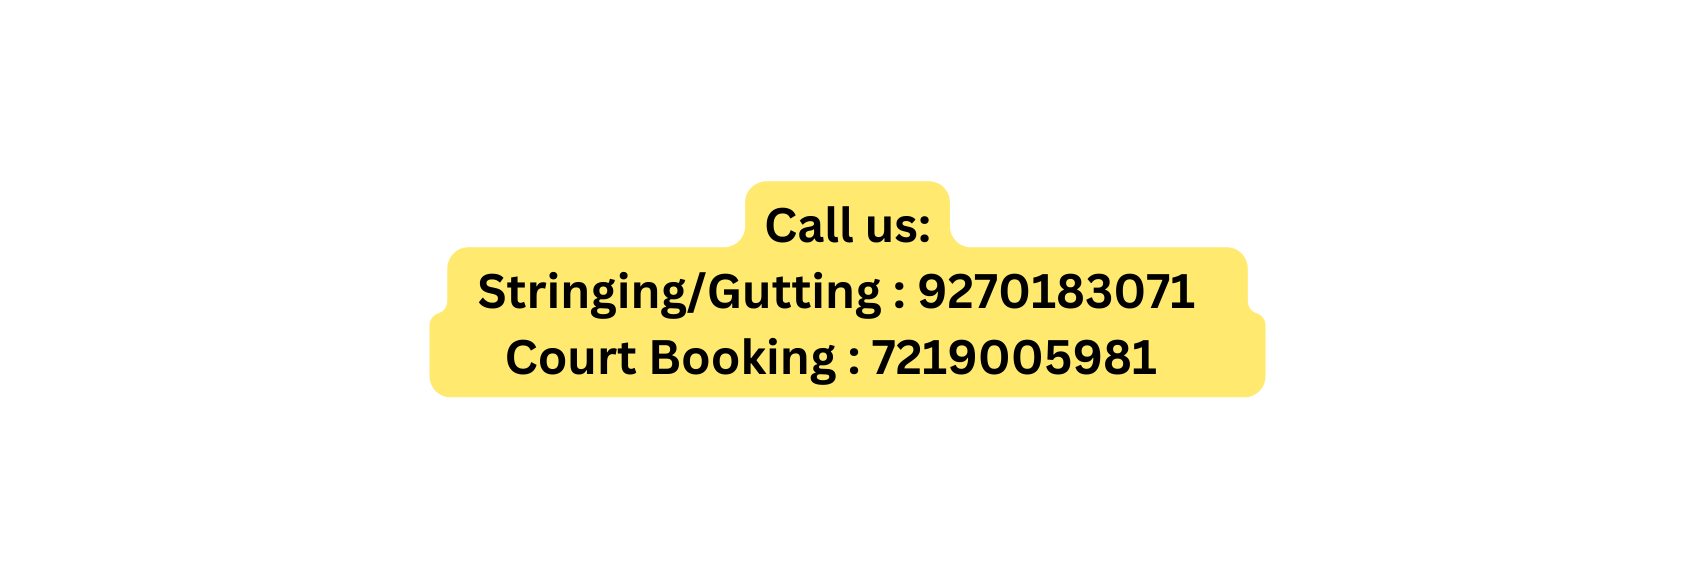 Call us Stringing Gutting 9270183071 Court Booking 7219005981